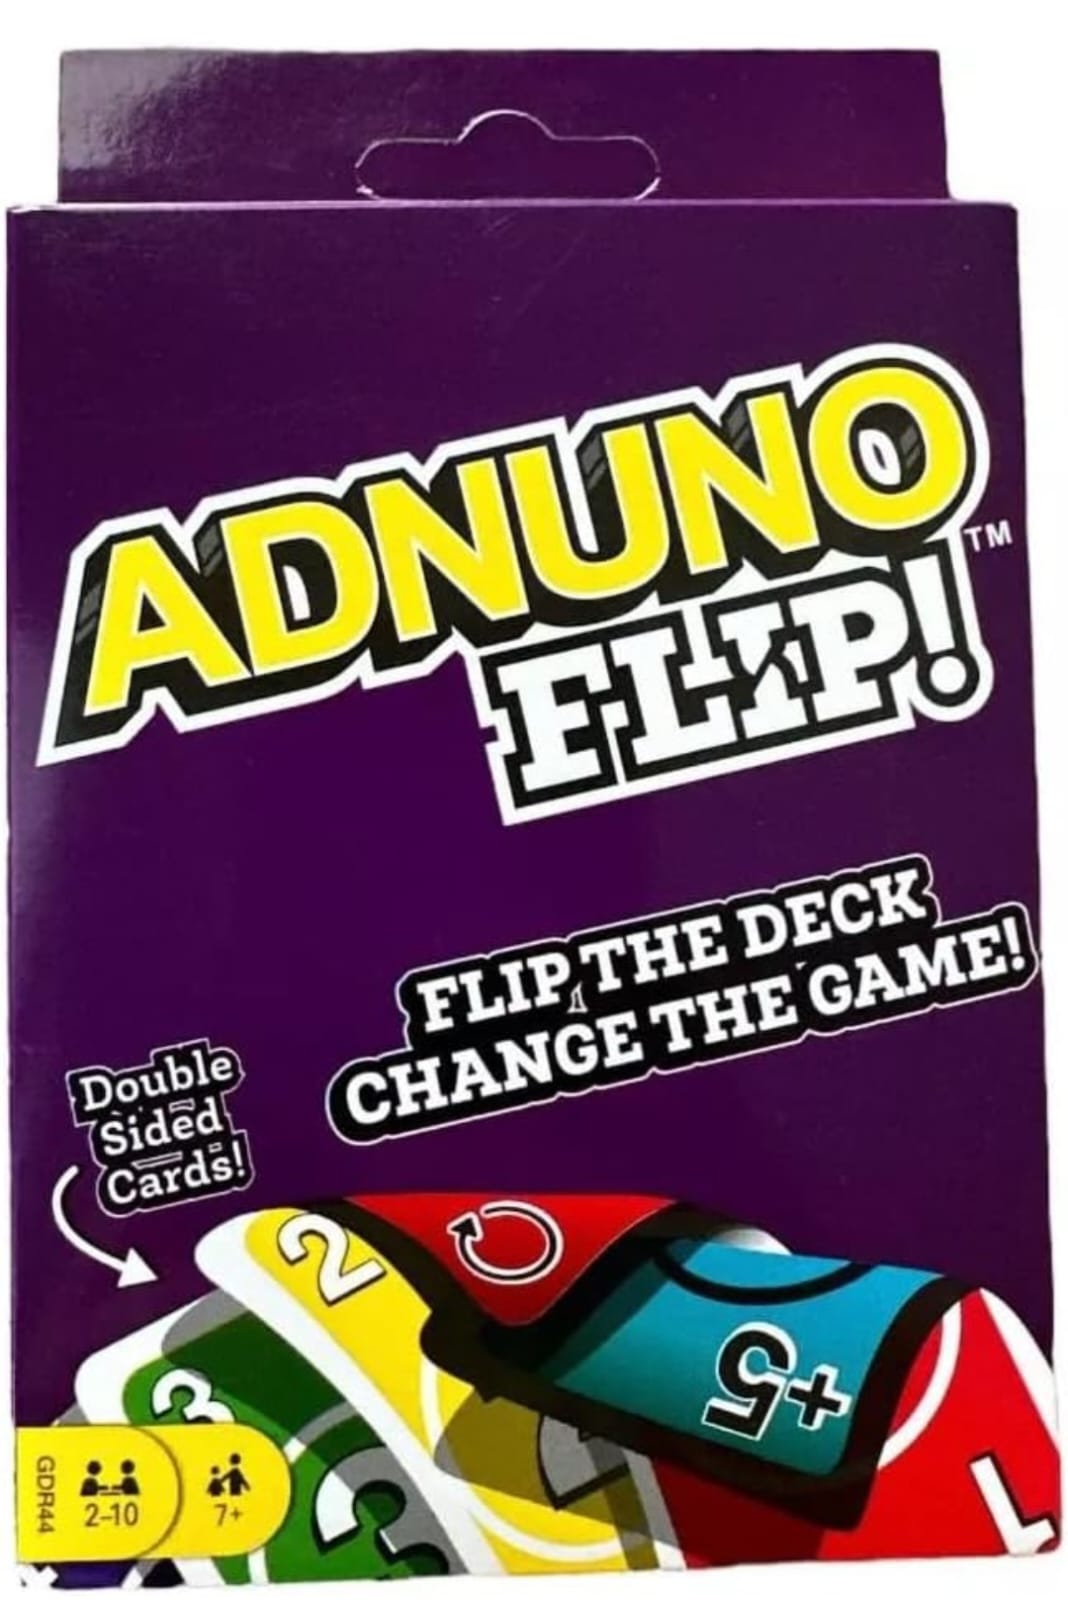 Premium Uno and Adnuno Party Combo For Kids